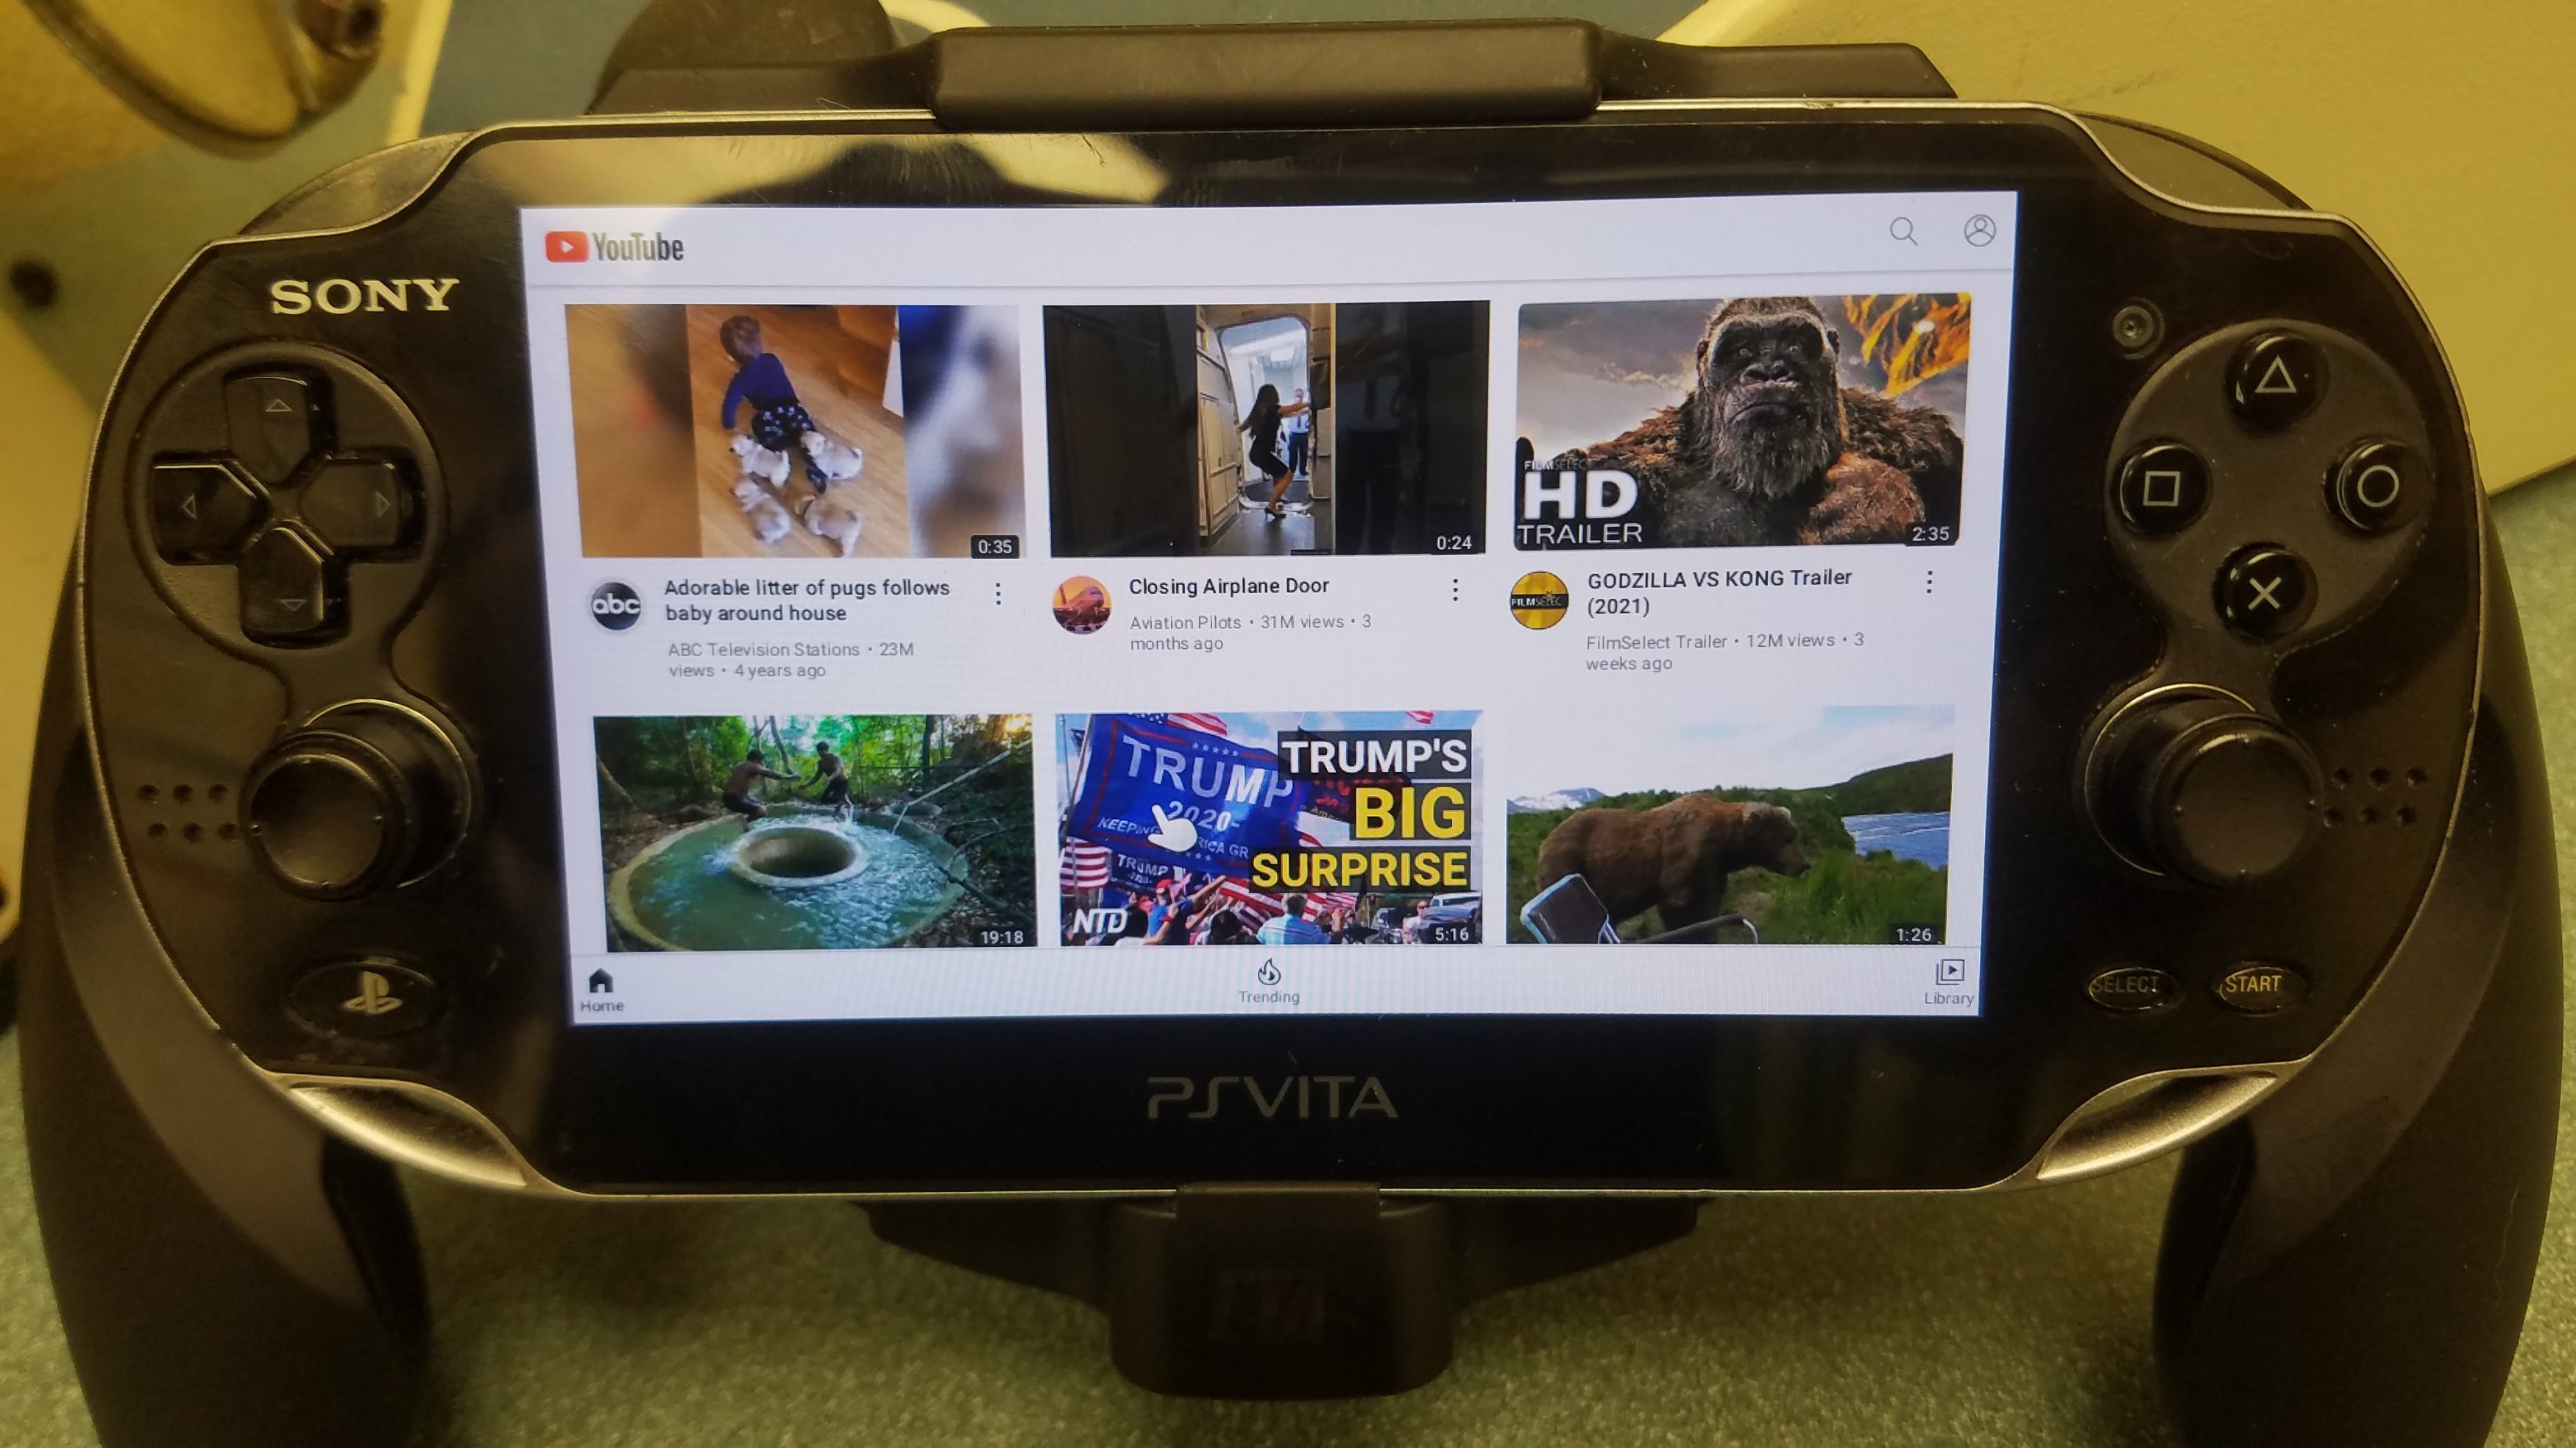 Release Cbpstube Unofficial Youtube Application For Ps Vita Gbatemp Net The Independent Video Game Community